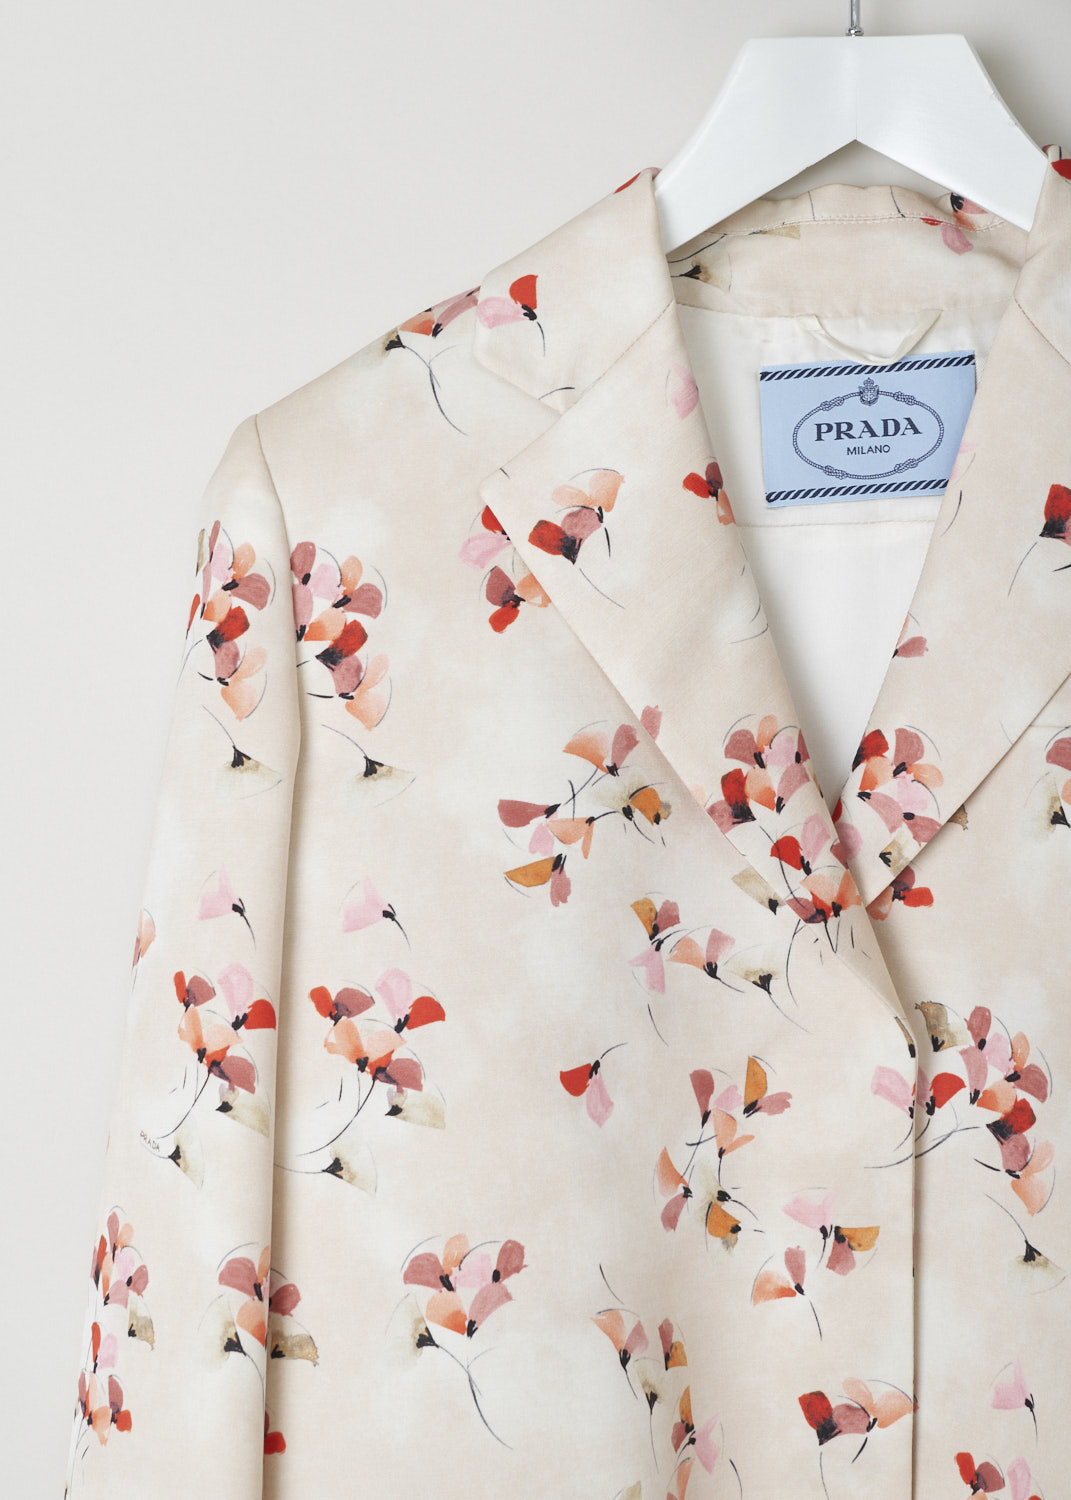 Prada, Peach coloured blazer adorned with a floral motif, radzmire_ginko_P5851_F0036_sabbia, pink red orange beige black print, detail, A cropped blazer comes coloured in a lighter shade of peach, and is decorated with an all over floral print in red, orange and beige. Further adorning the front is a notched lapel that leads into the fastening option being press studs, going further down there are two flap pockets on waist height and a single pocket on chest height. On the back you will find a deep inverted pleat on each of the shoulders ensures a unique fitting.